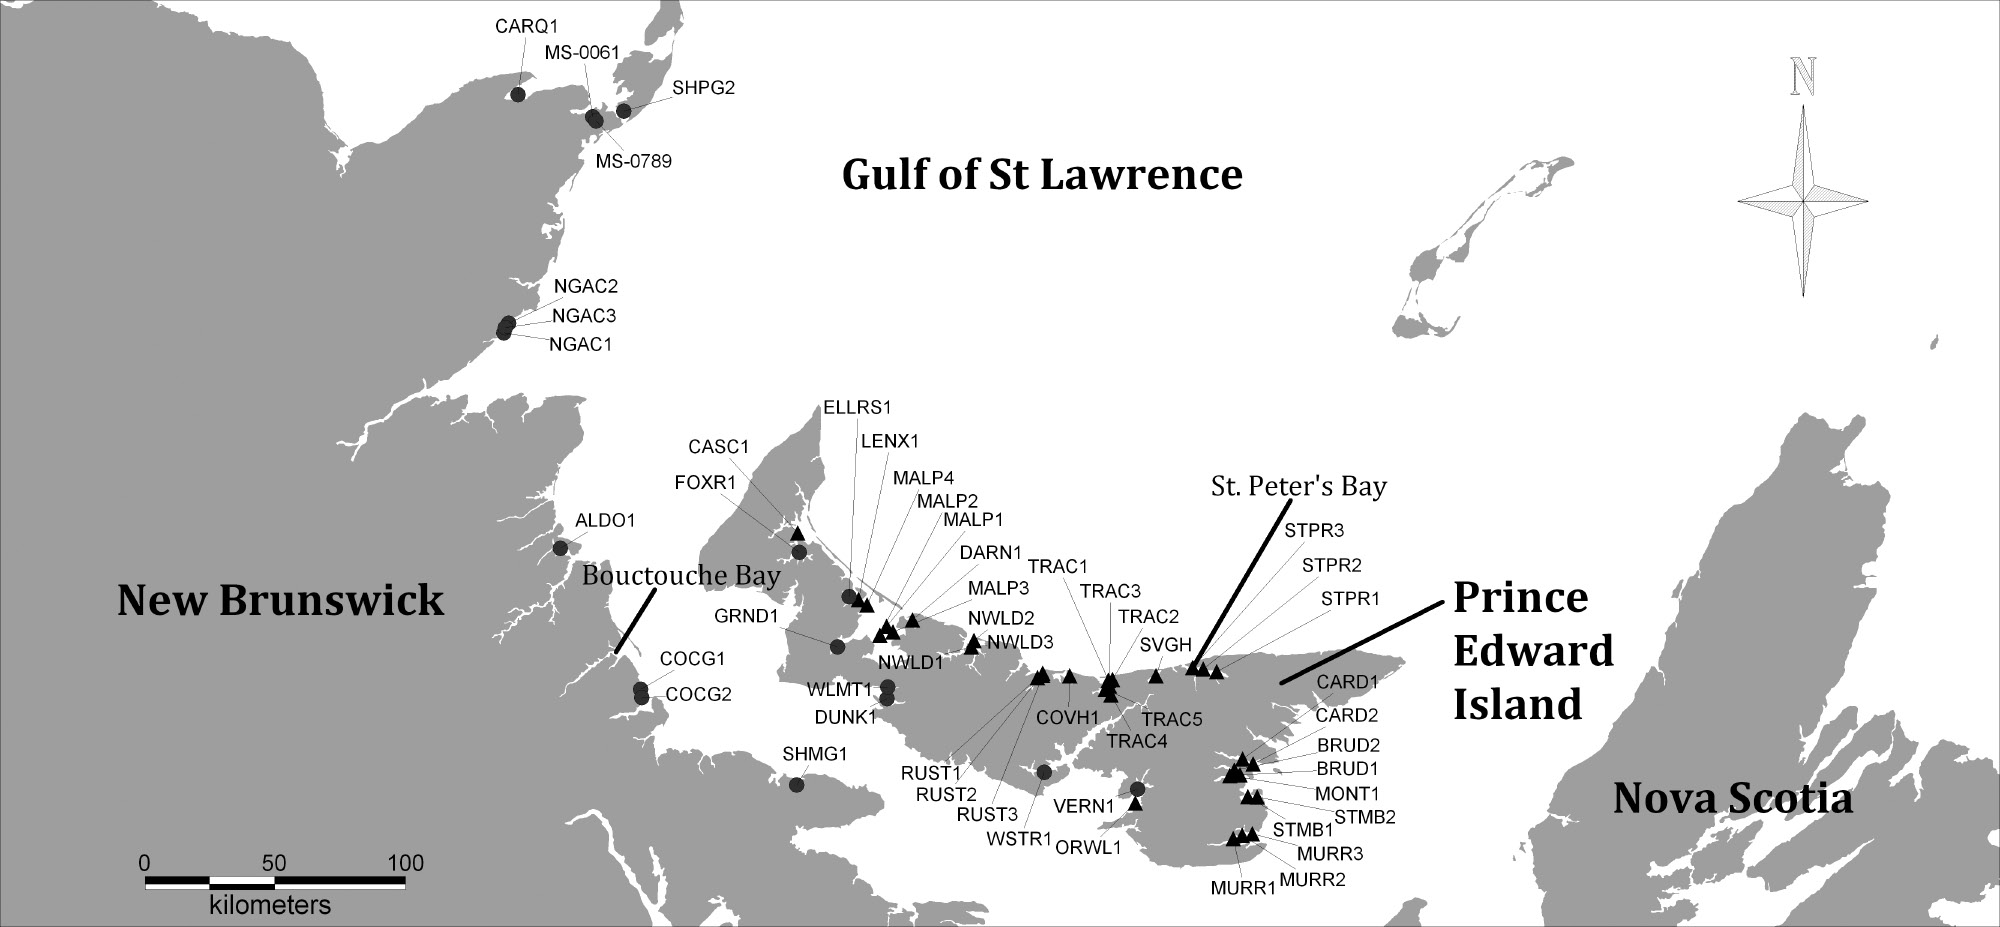 Study area and location of monitoring stations of oysters and mussels